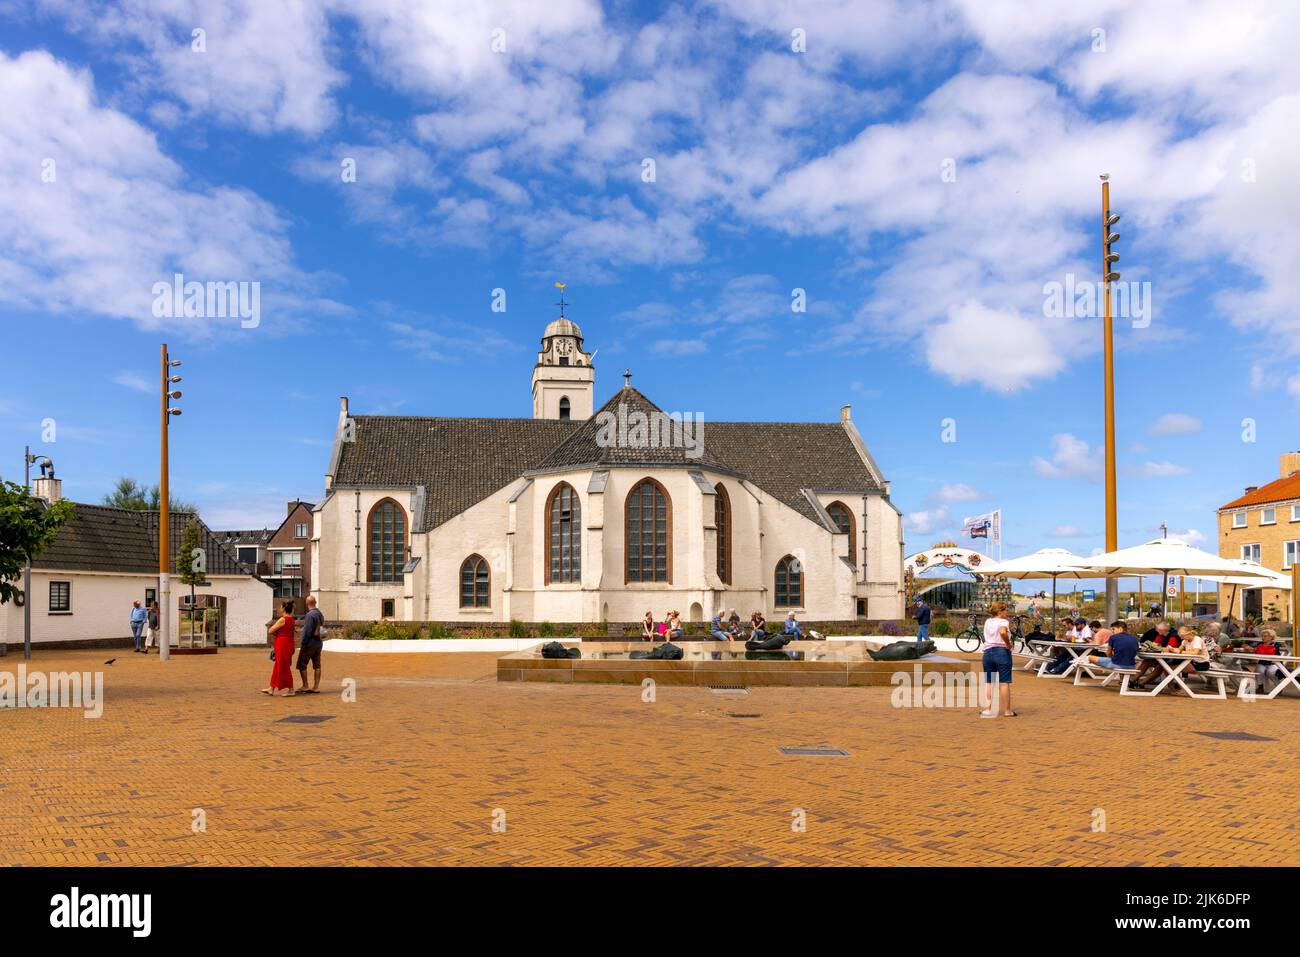 Relaxing tourists with view of Andreaskerk (Andrew's Church), a 15th century building and local landmark in Katwijk, South Holland, The Netherlands. Stock Photo